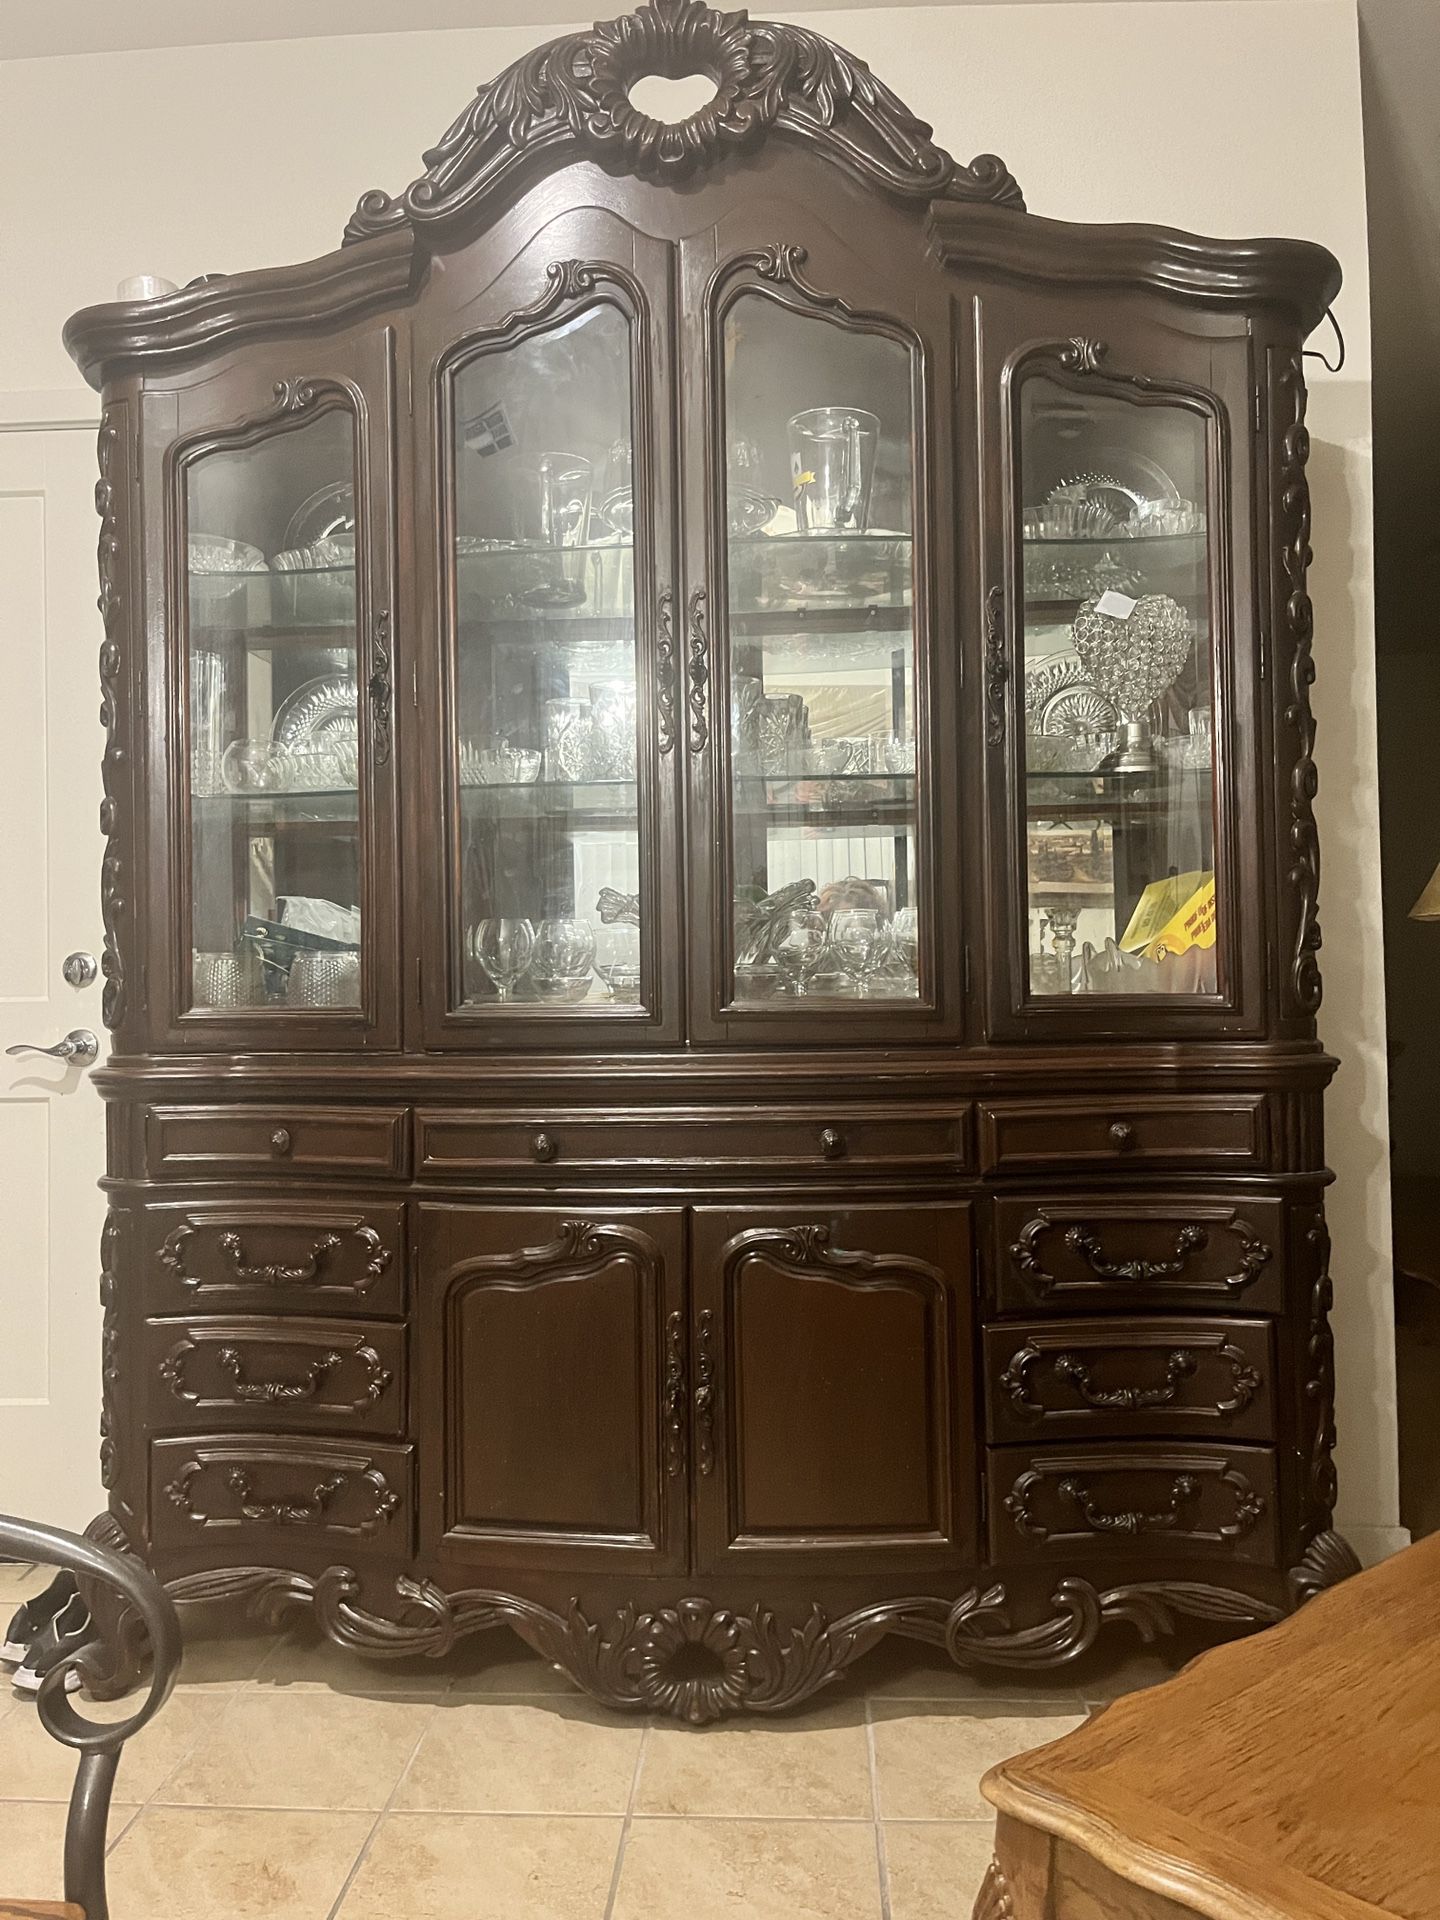 Beautiful Wooden China Cabinet In Great Conditions, There’s Nothing Broken, I am moving out and I am selling all my furnitur